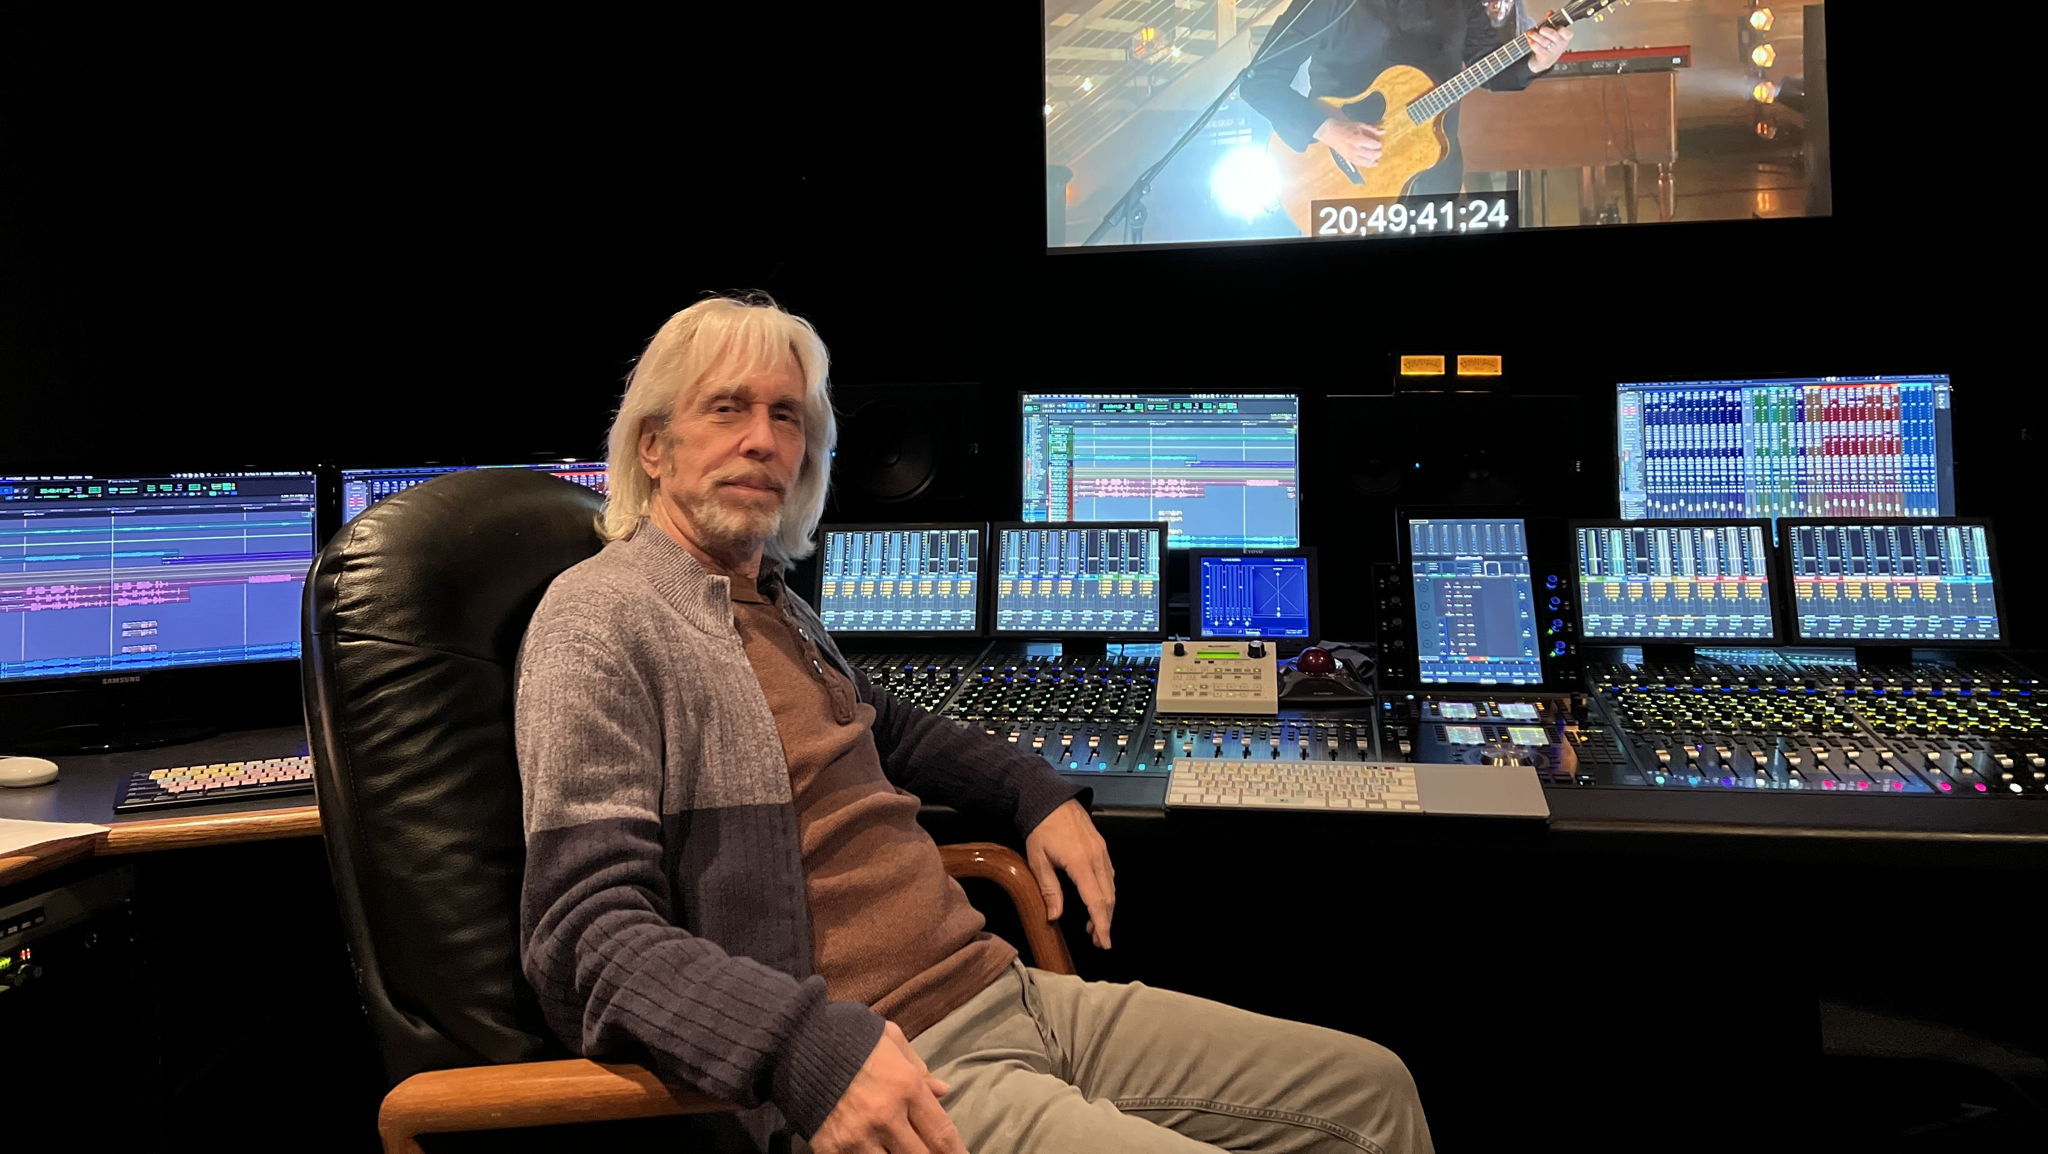 Tom Davis worked with HEAR to deliver the broadcast mix for the iHeartCountry concert in Austin from SeisMic studio in Nashville. HEAR's Jody Elff provided technical support from Maui.